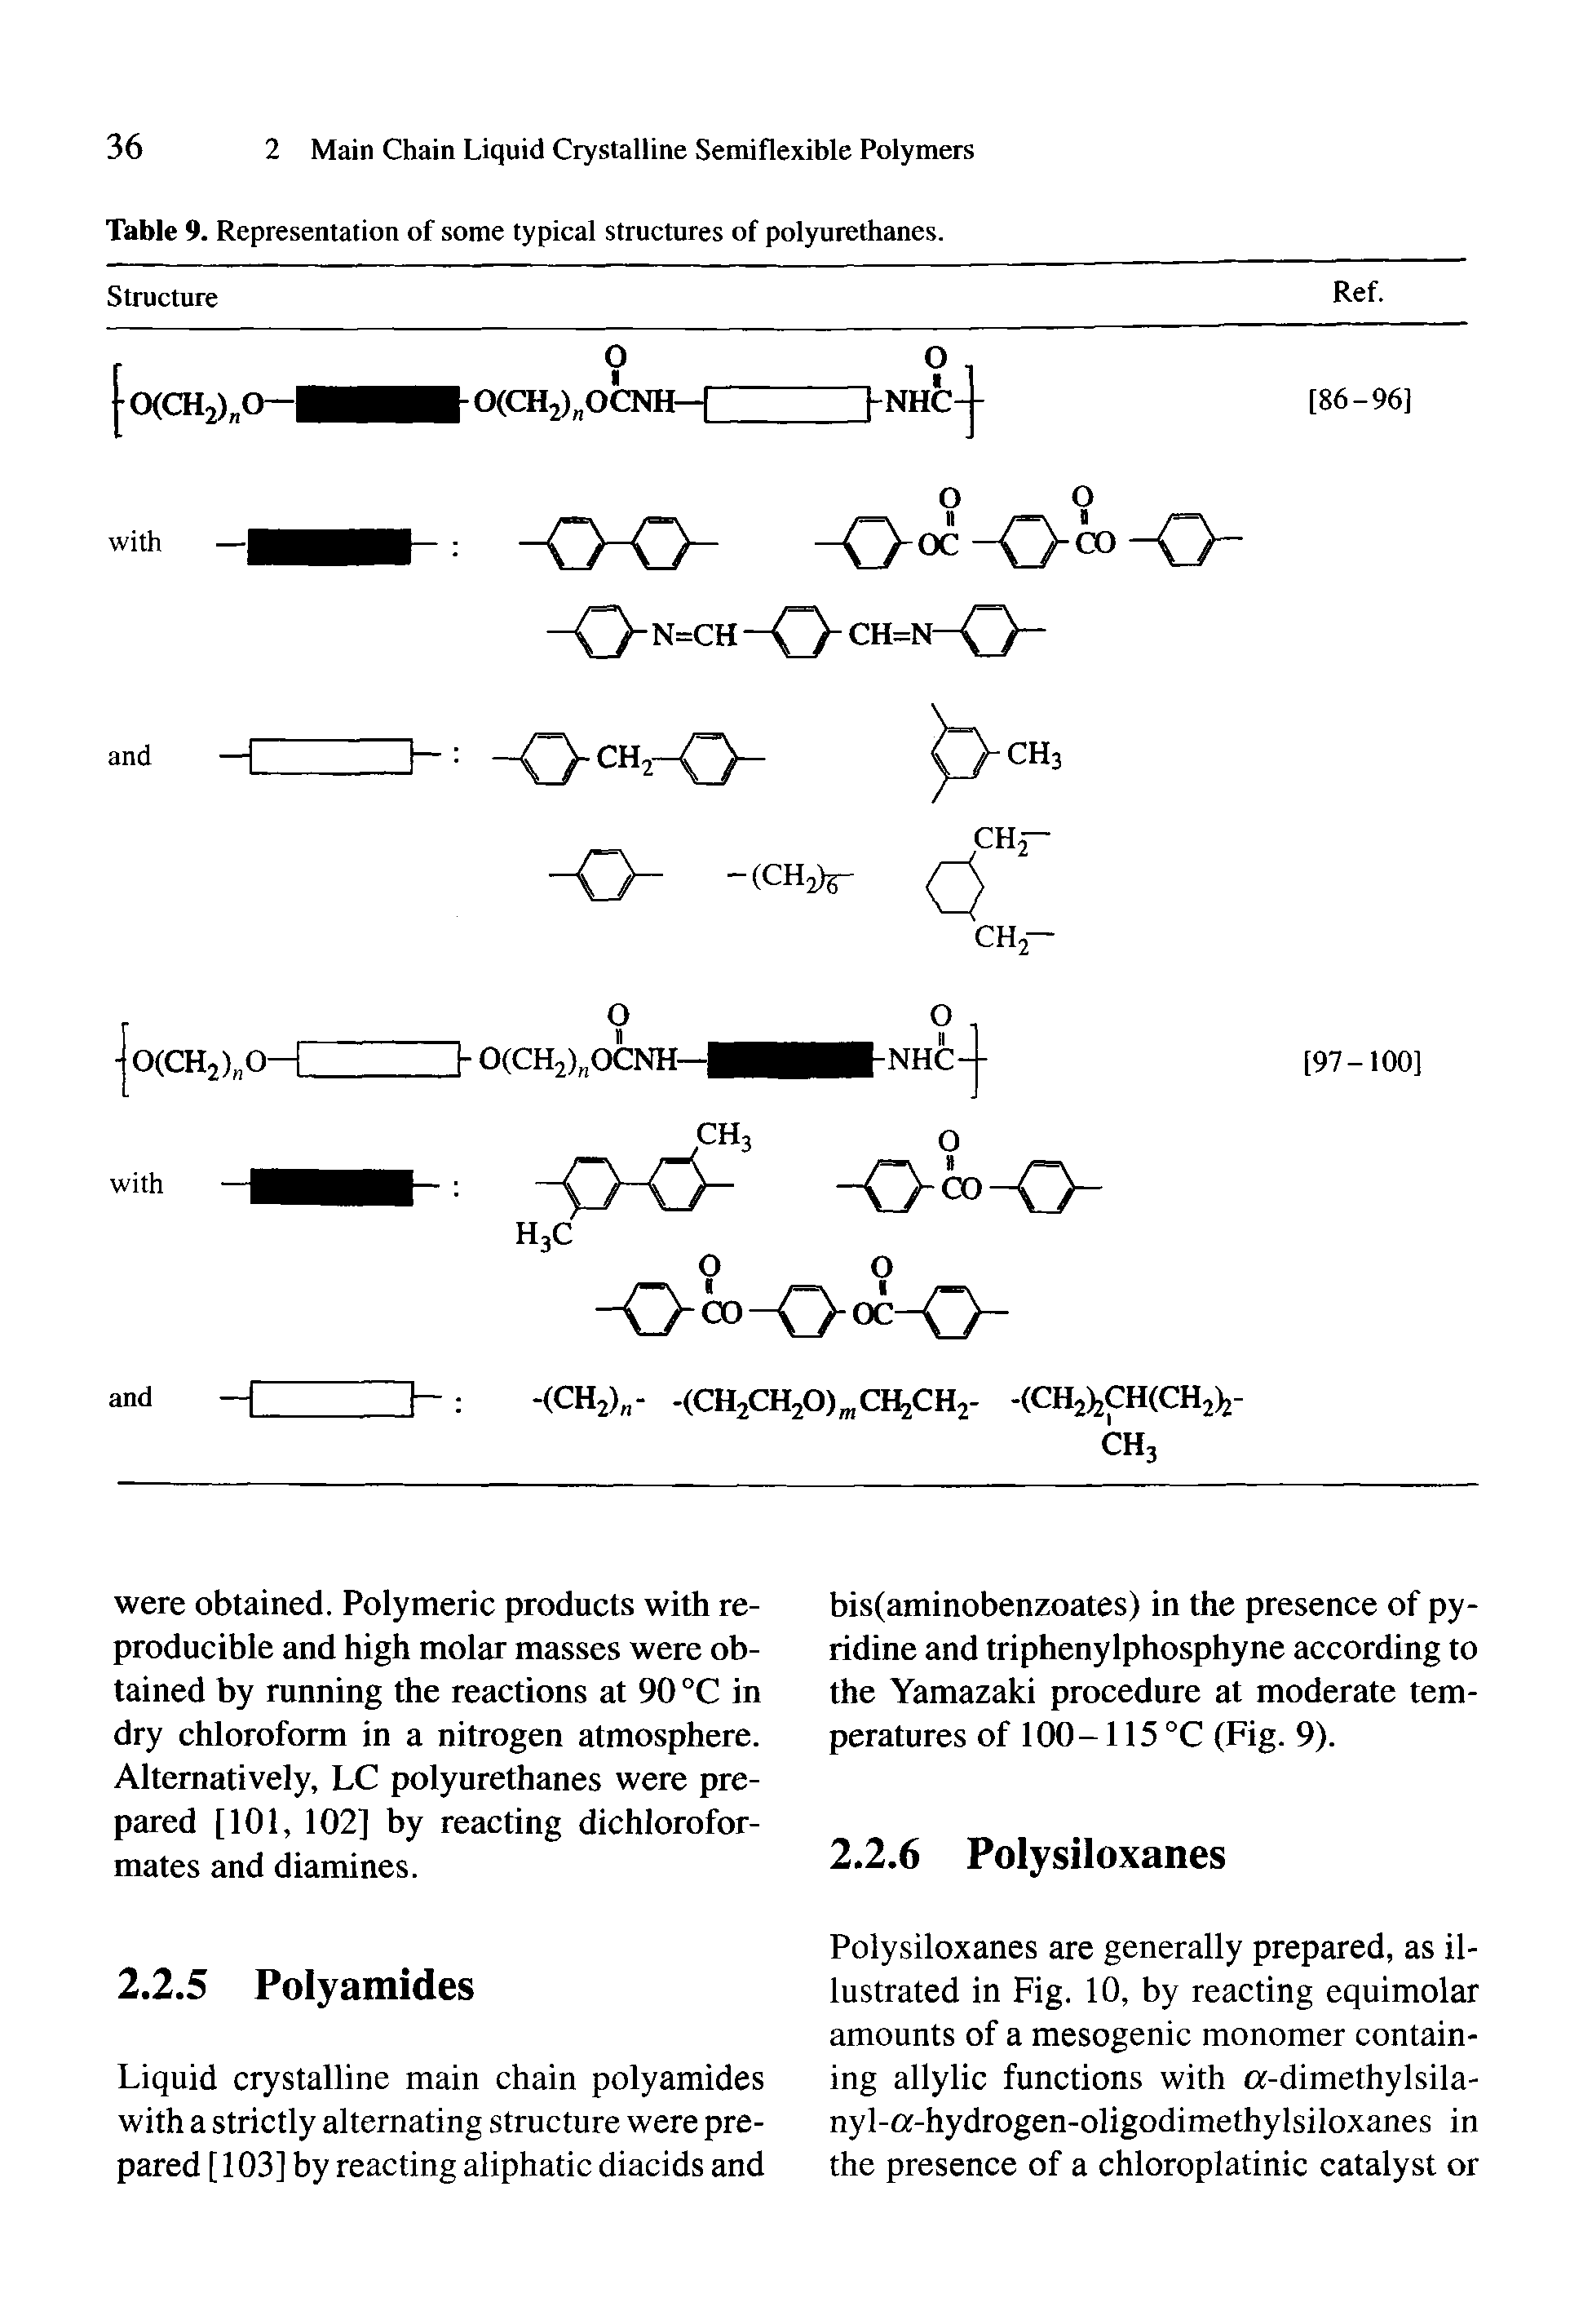 Table 9. Representation of some typical structures of polyurethanes.